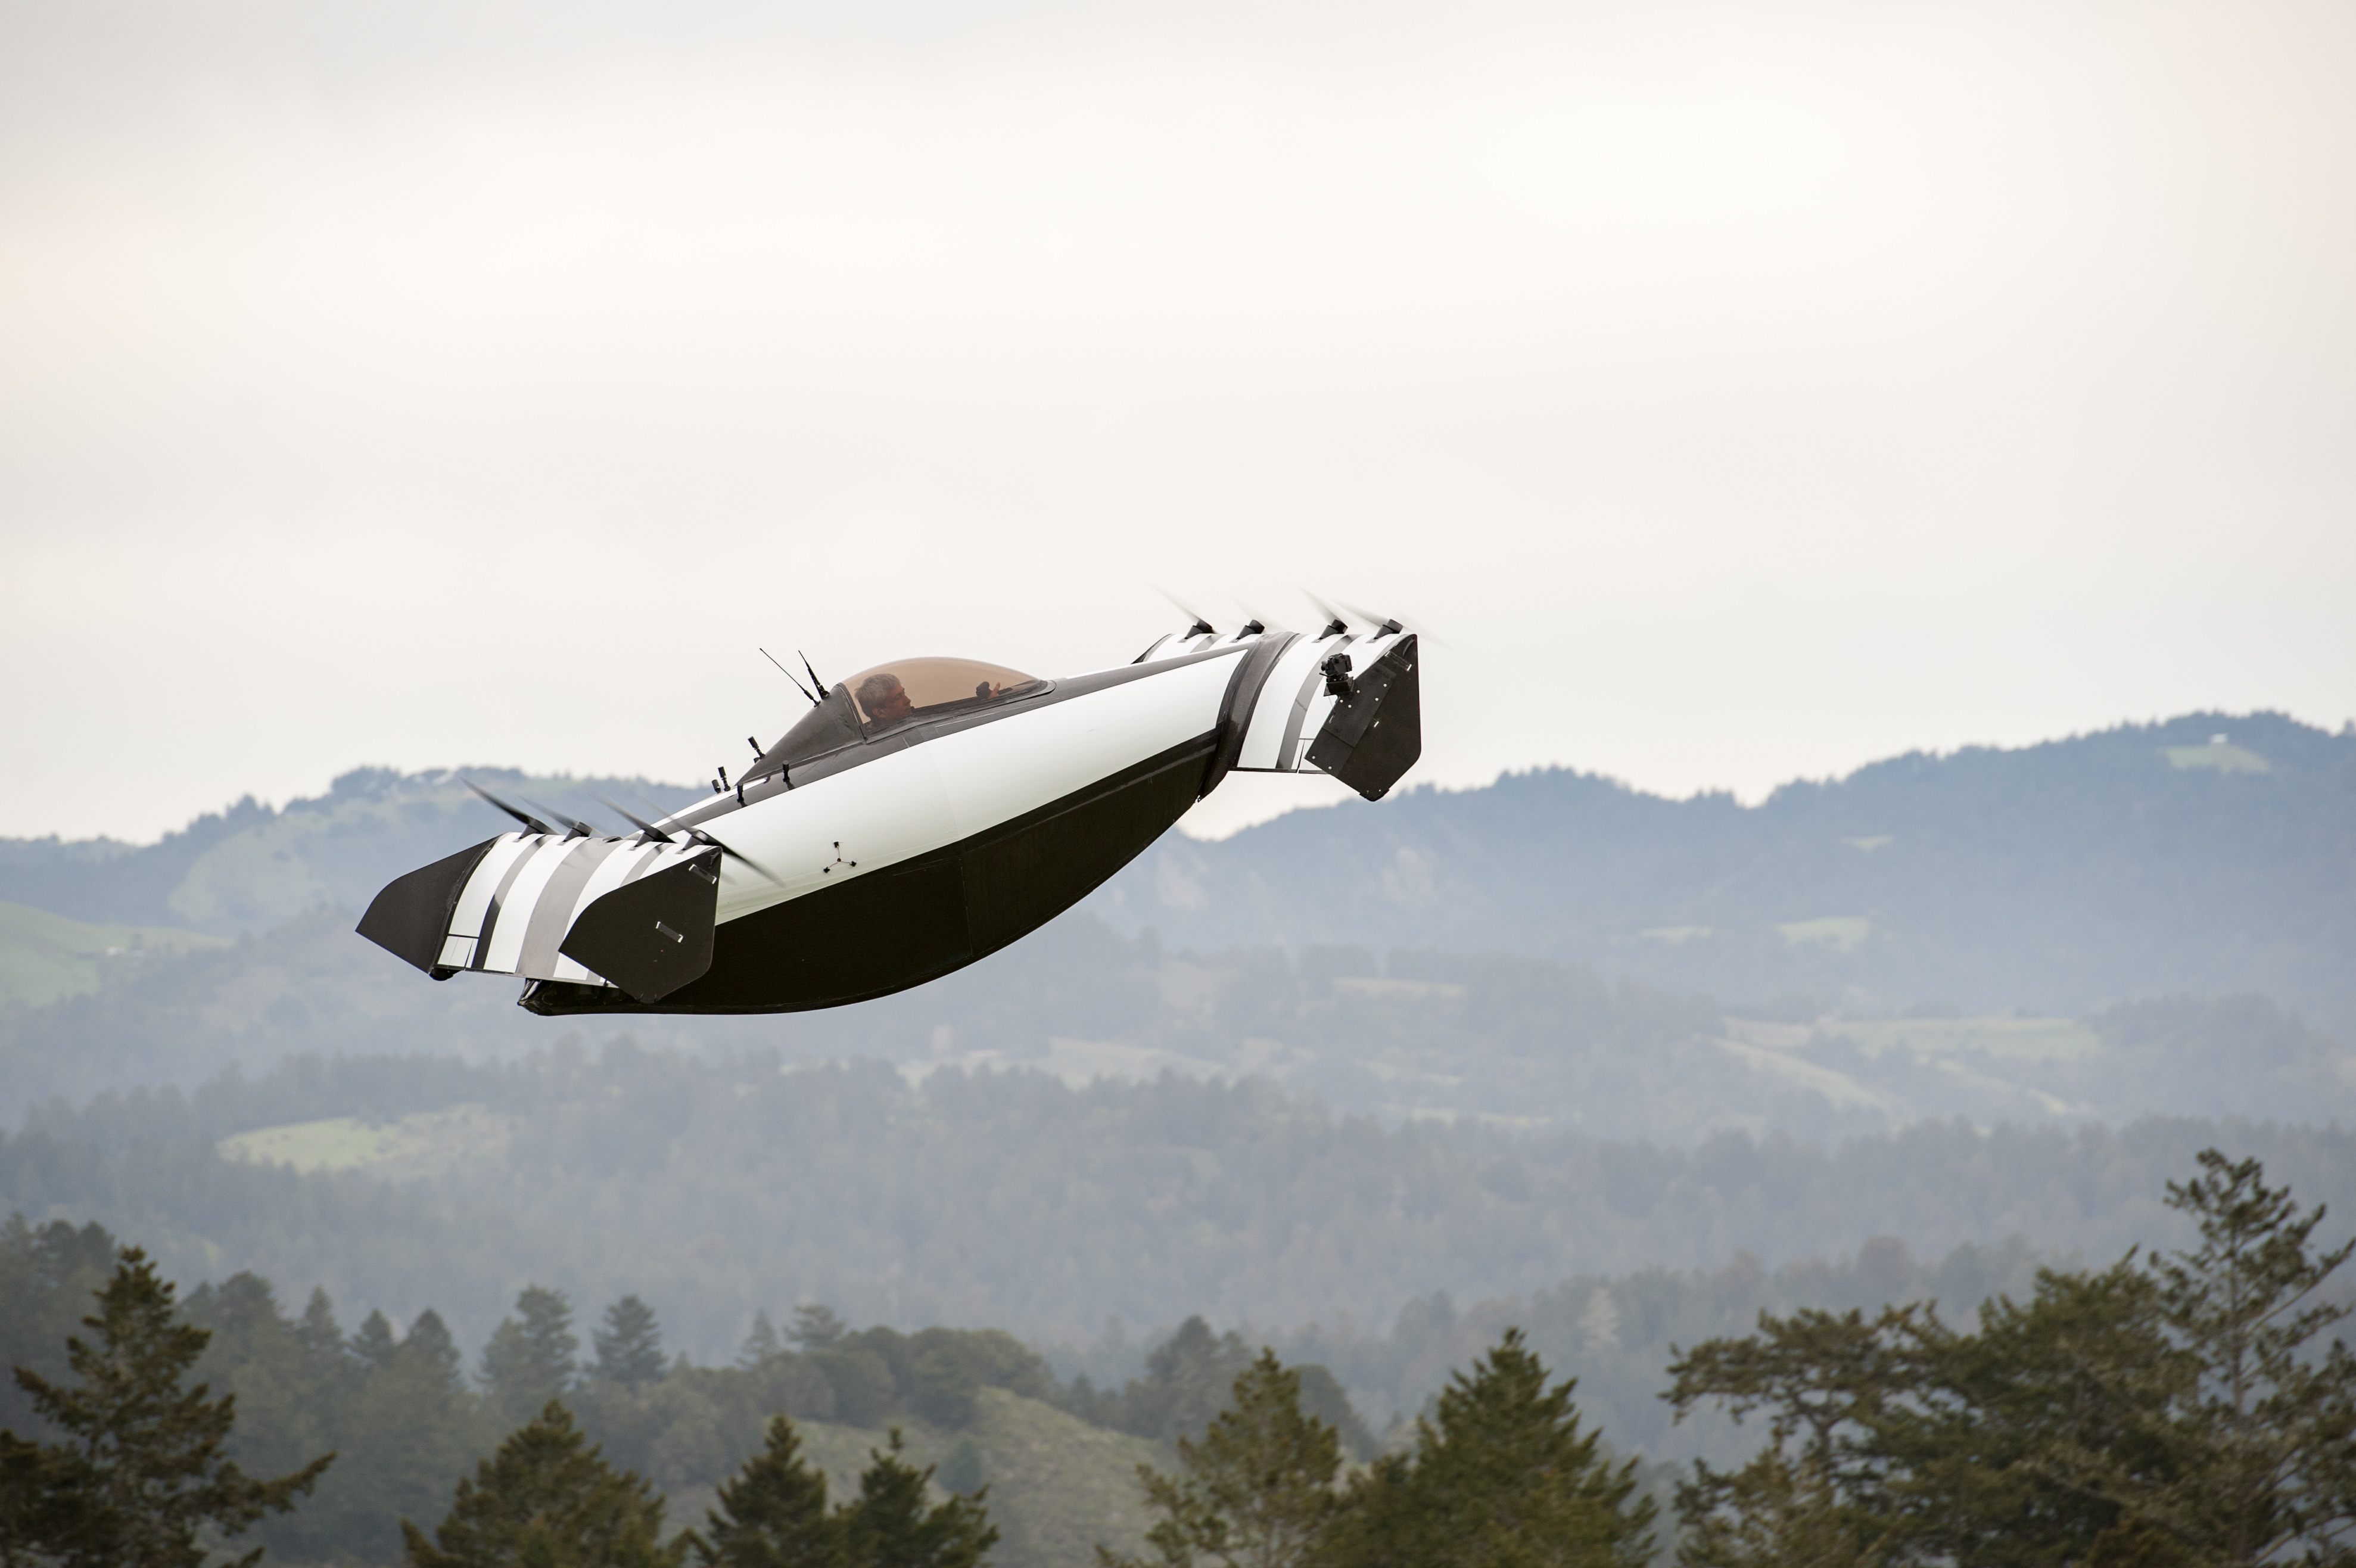 Opener's BlackFly opens the world of personal flight to individuals, using the latest technology and safety innovations. (Photo courtesy of Opener)